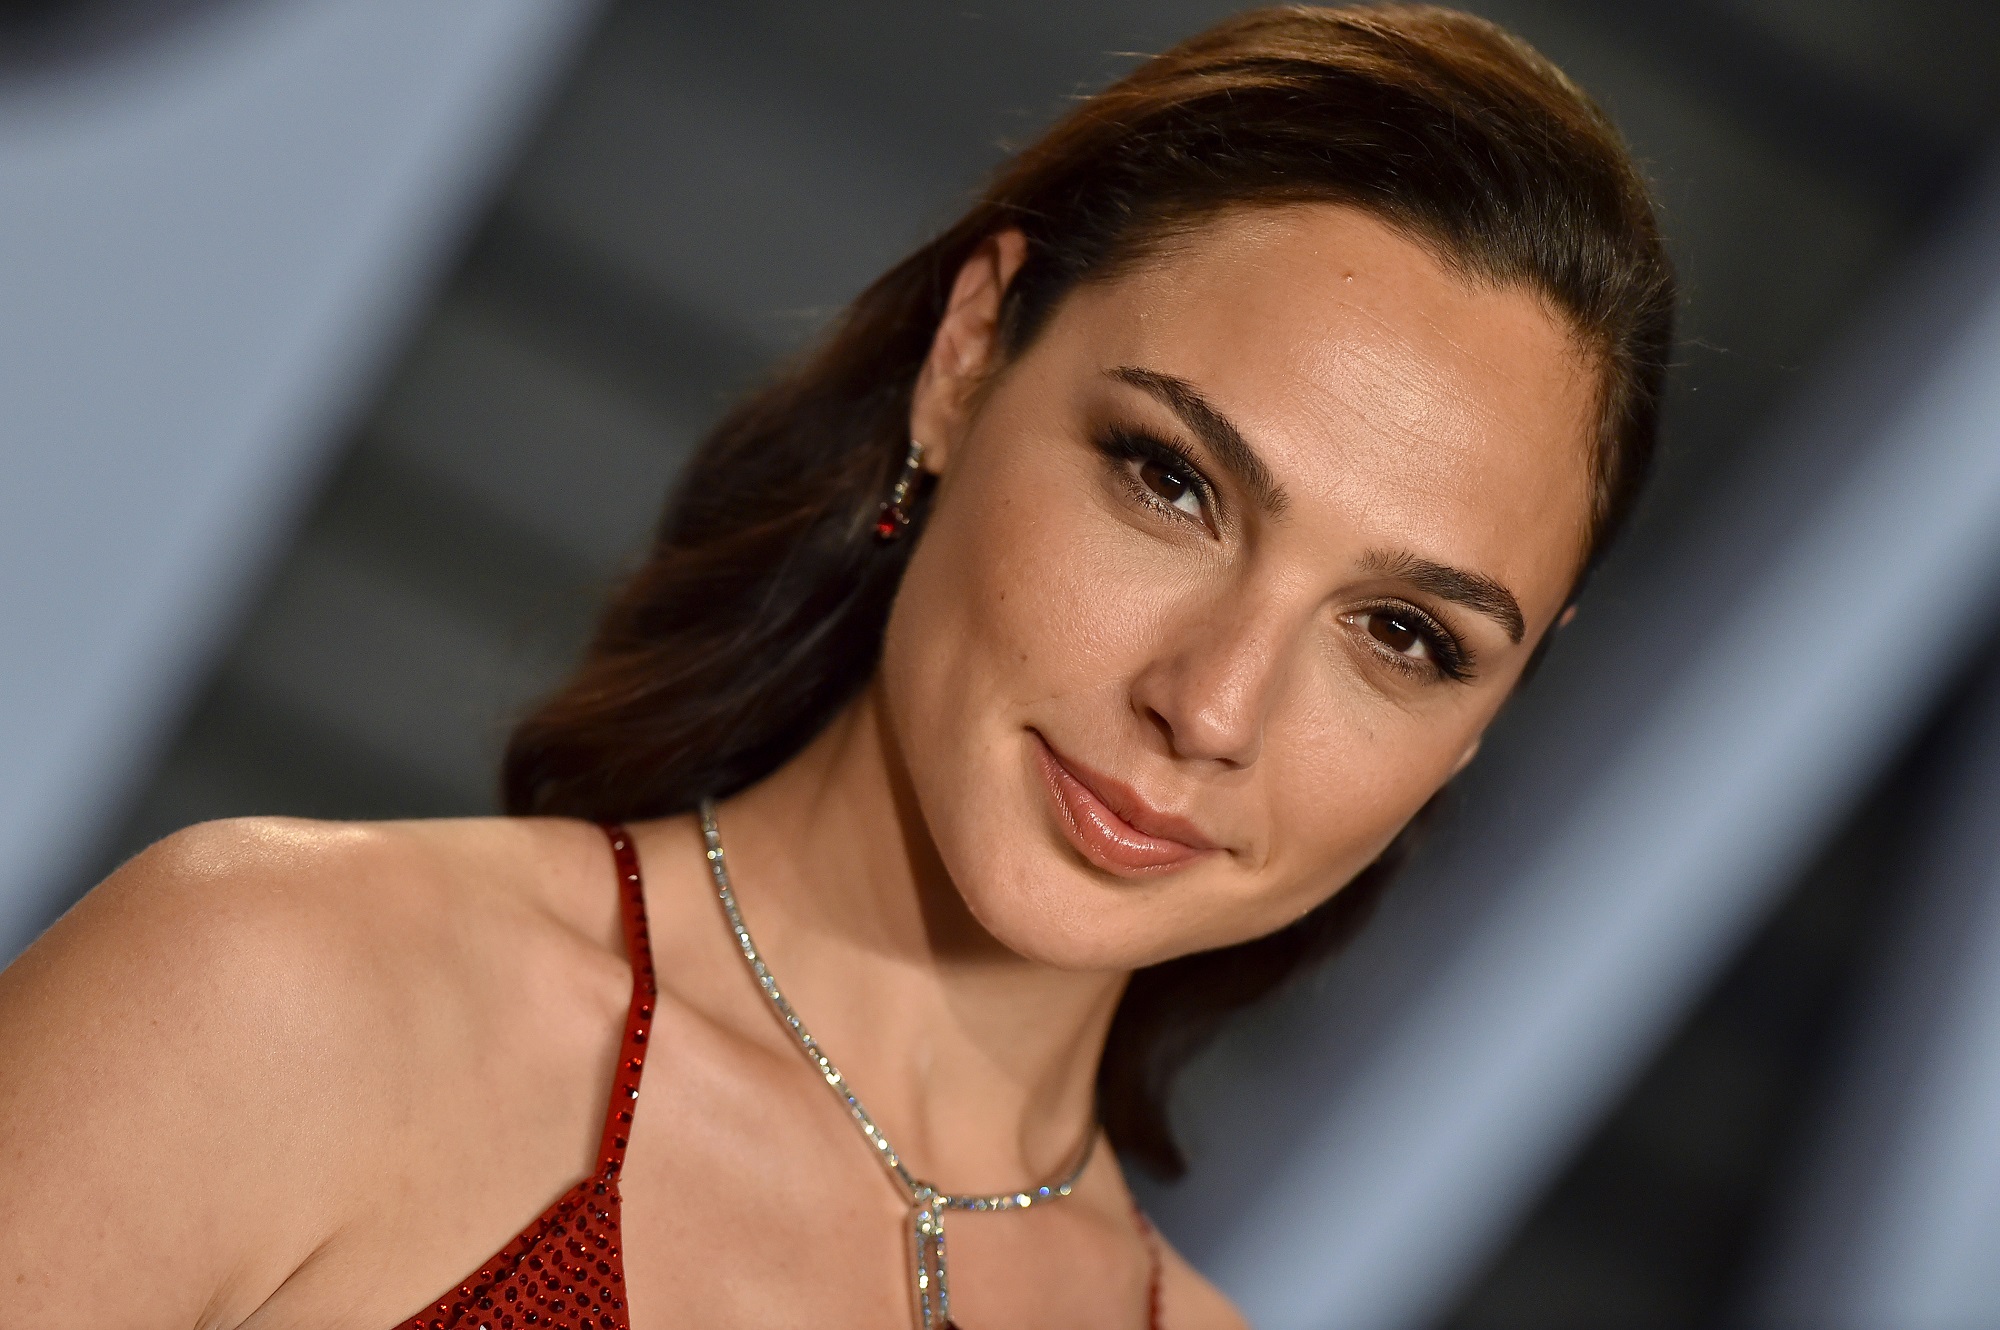 Gal Gadot attends the 2018 Vanity Fair Oscar Party on March 4, 2018 in Beverly Hills, California.